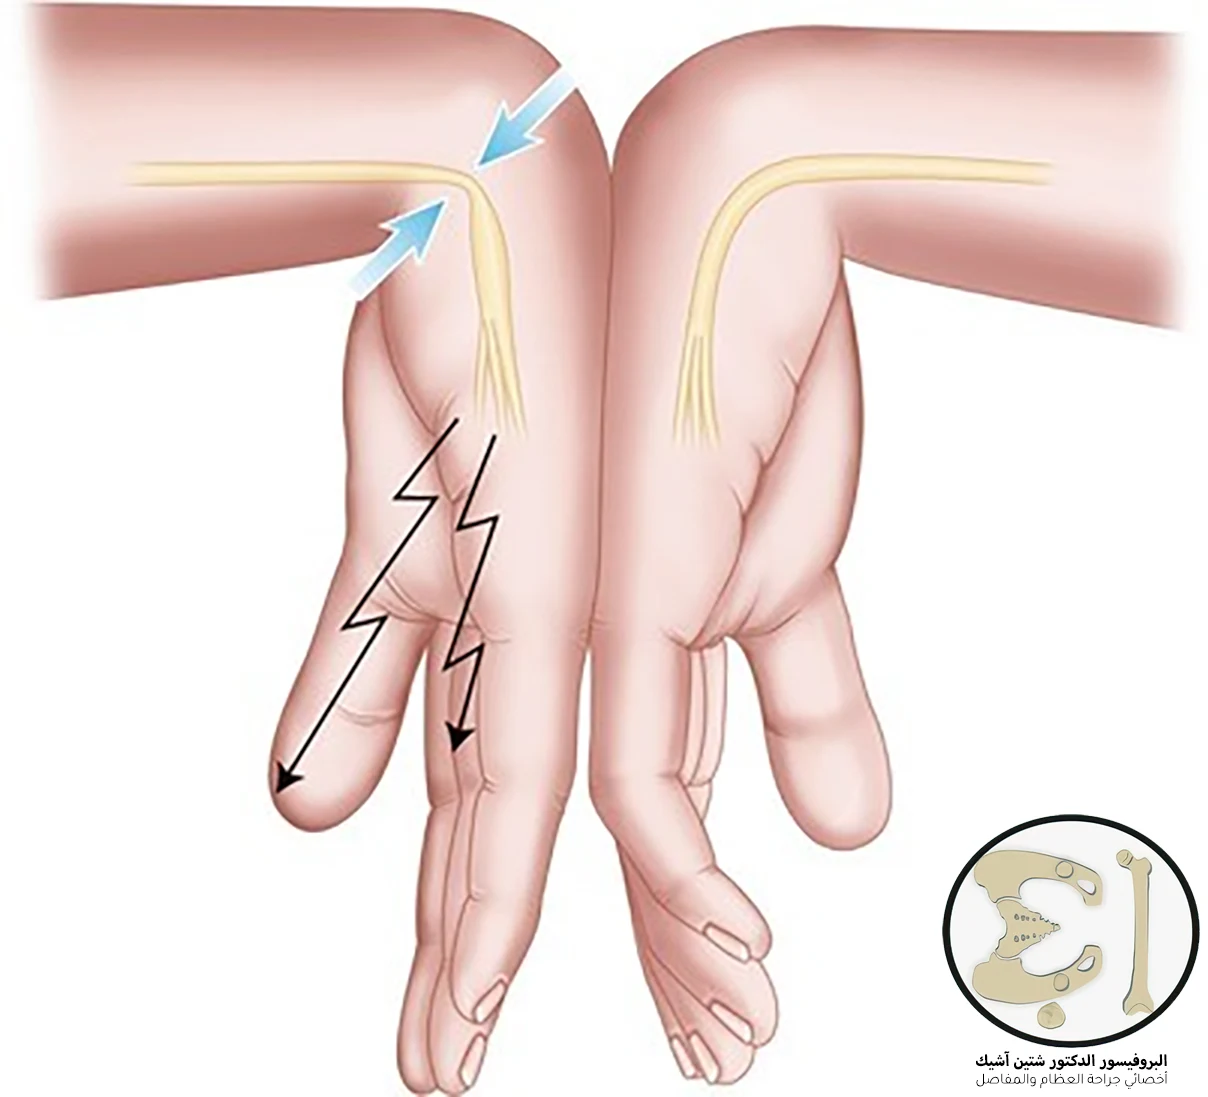 Image showing that bending the hand may trigger a pain attack in patients with carpal tunnel syndrome